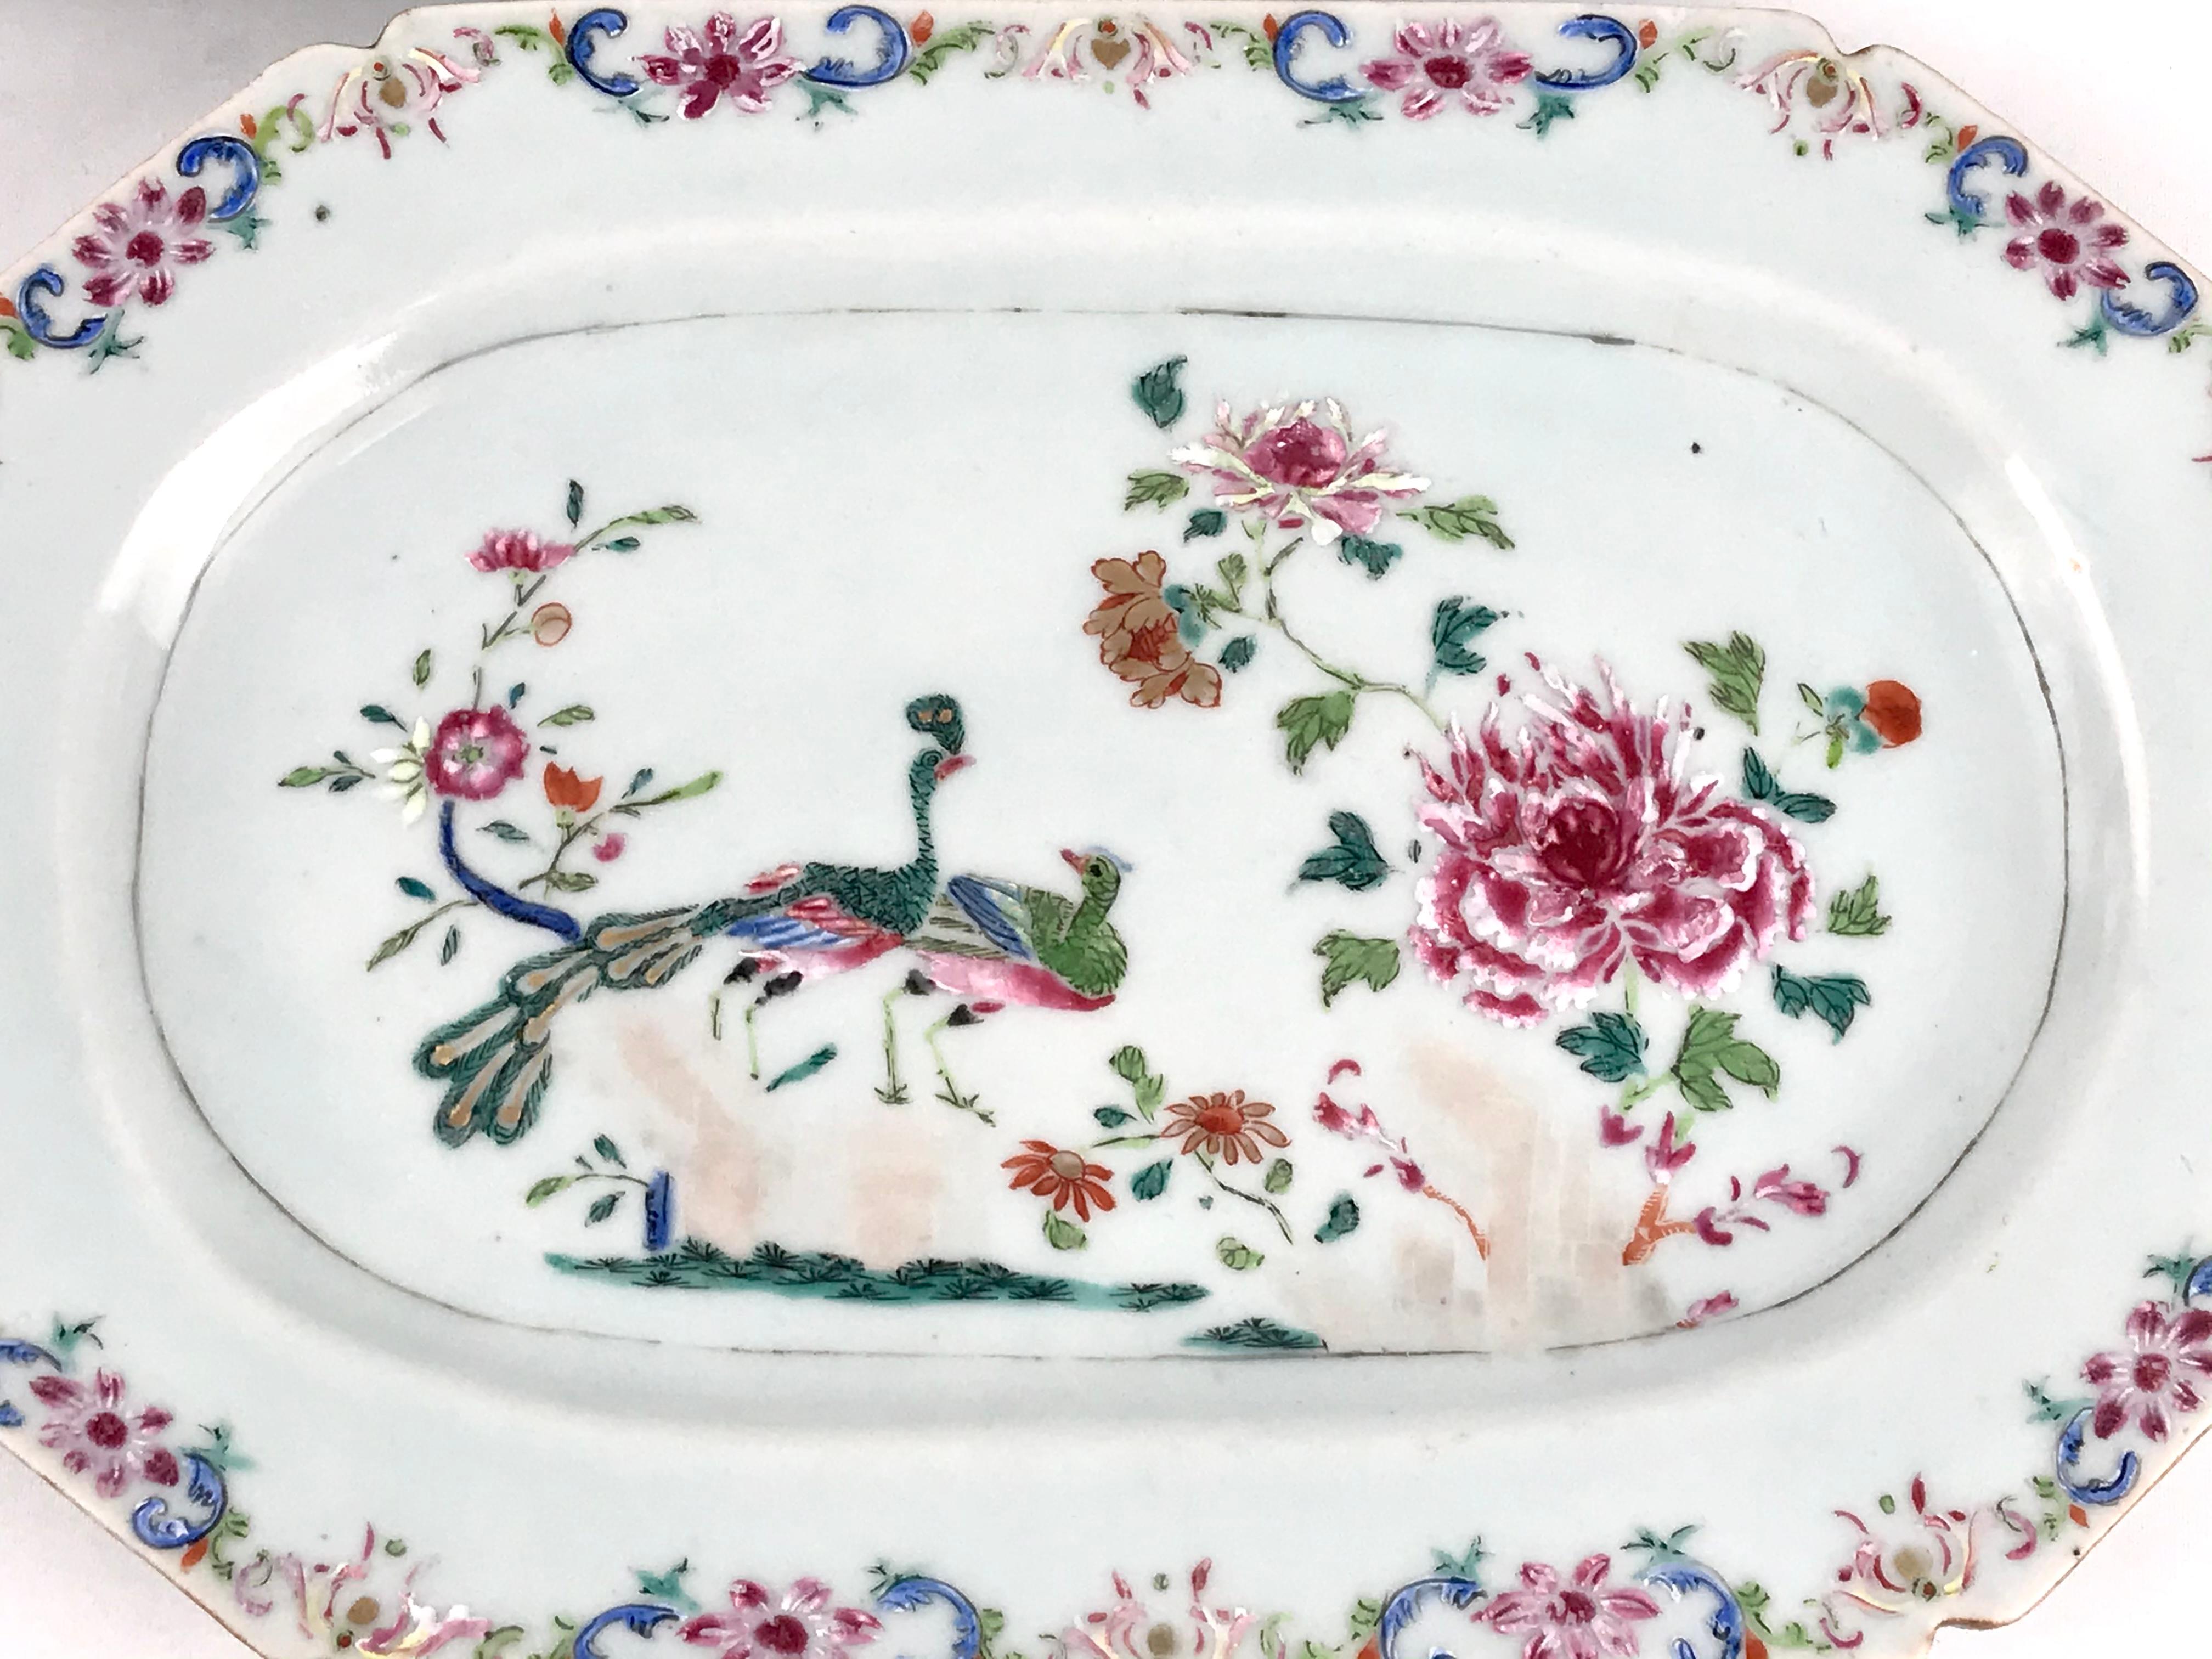 A Pair of Chinese famille rose 18th century Porcelain double peacock Platters. Qianlong
Hand decorated in the classic pattern showing a peacock and peahen perched on rockwork in a garden growing with large, lush peony blooms alongside smaller